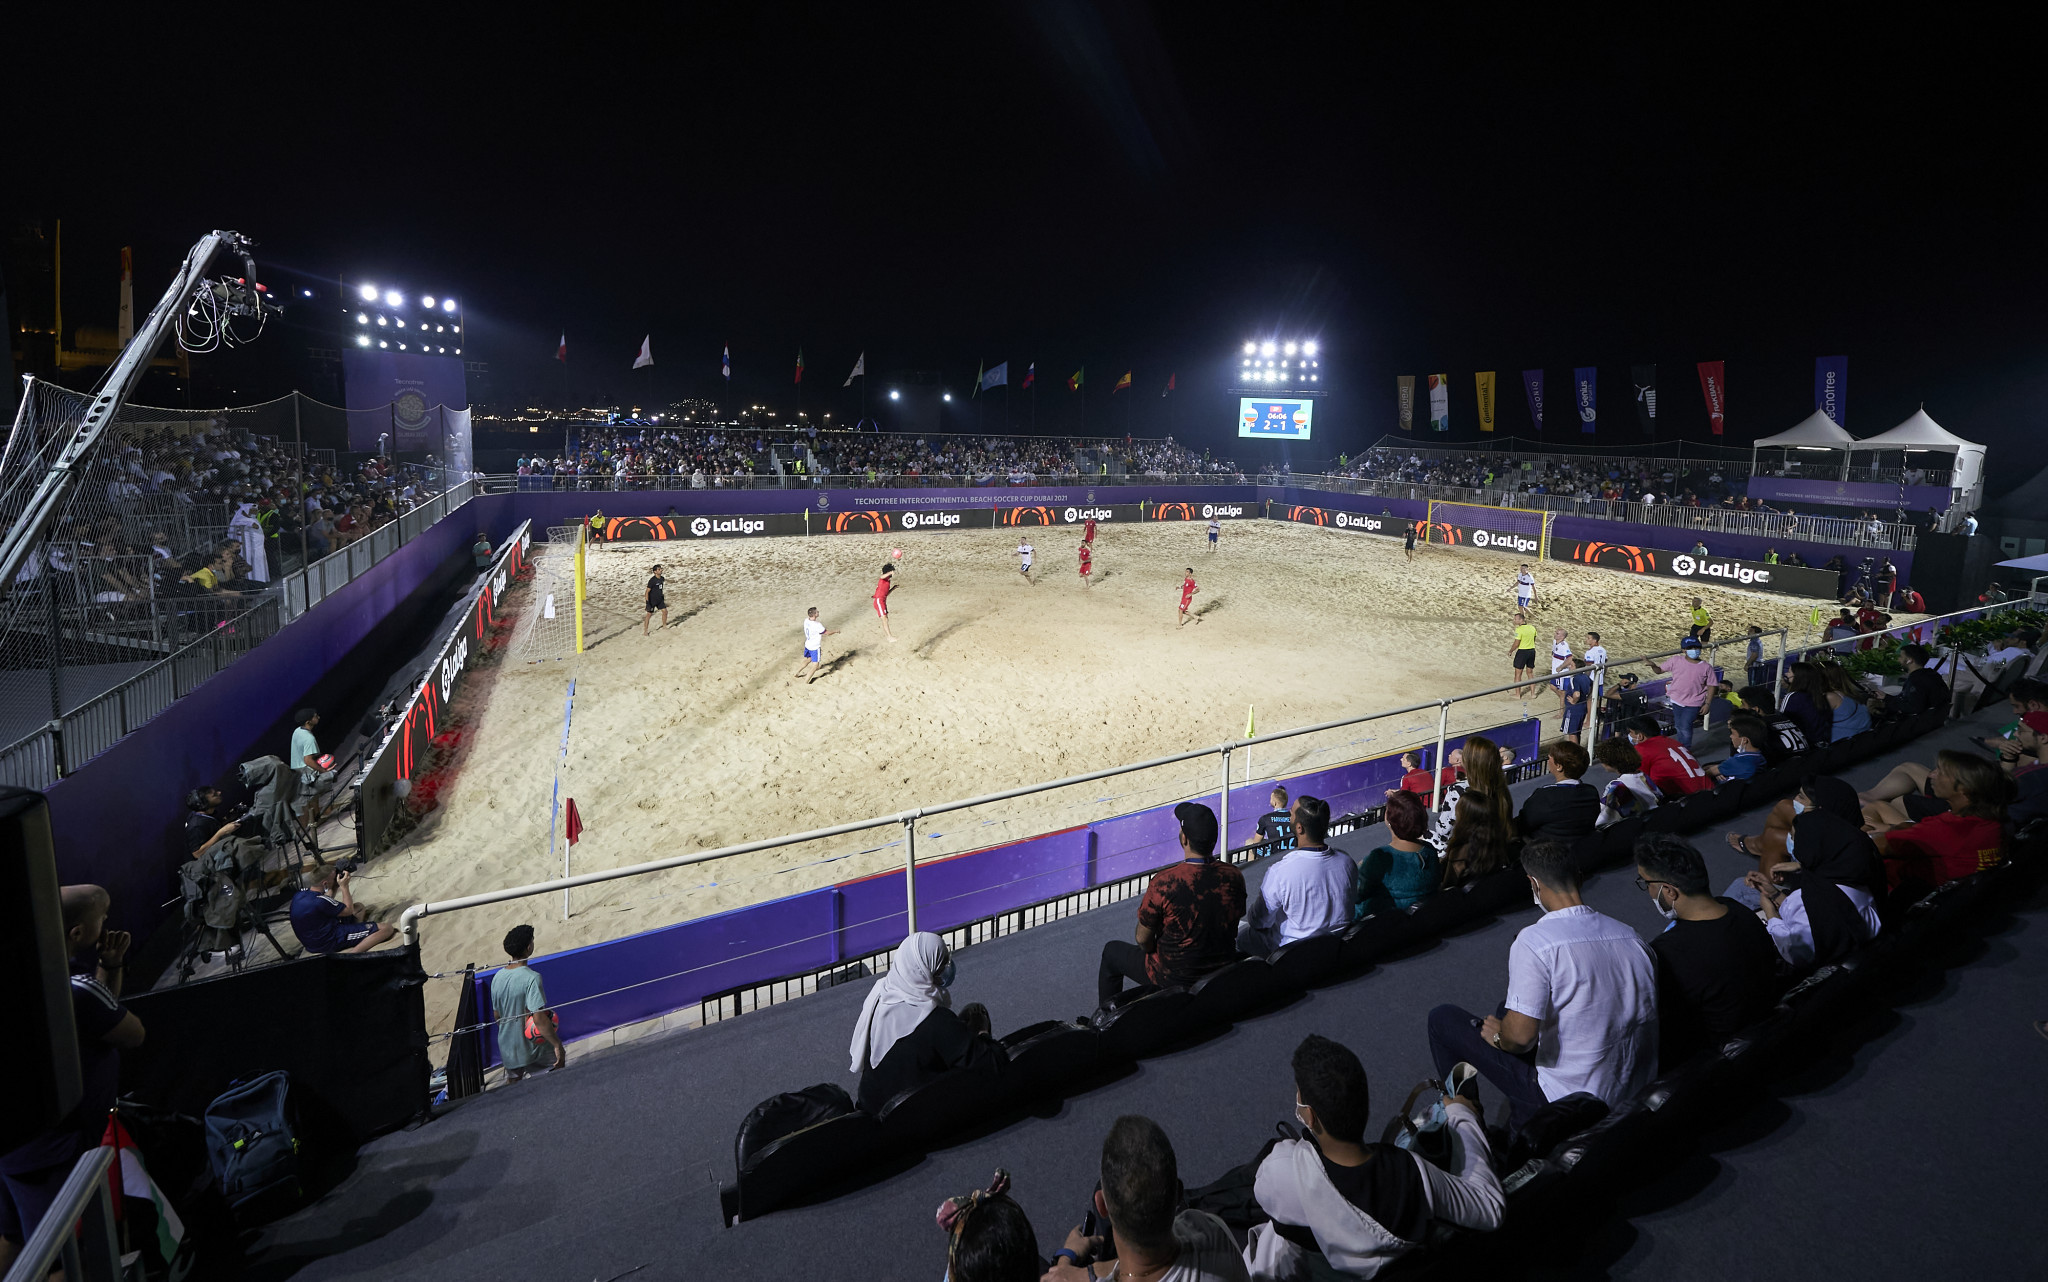 Senegal, Russia, Portugal and Iran have progressed to the Intercontinental Beach Soccer Cup semi-finals ©Getty Images